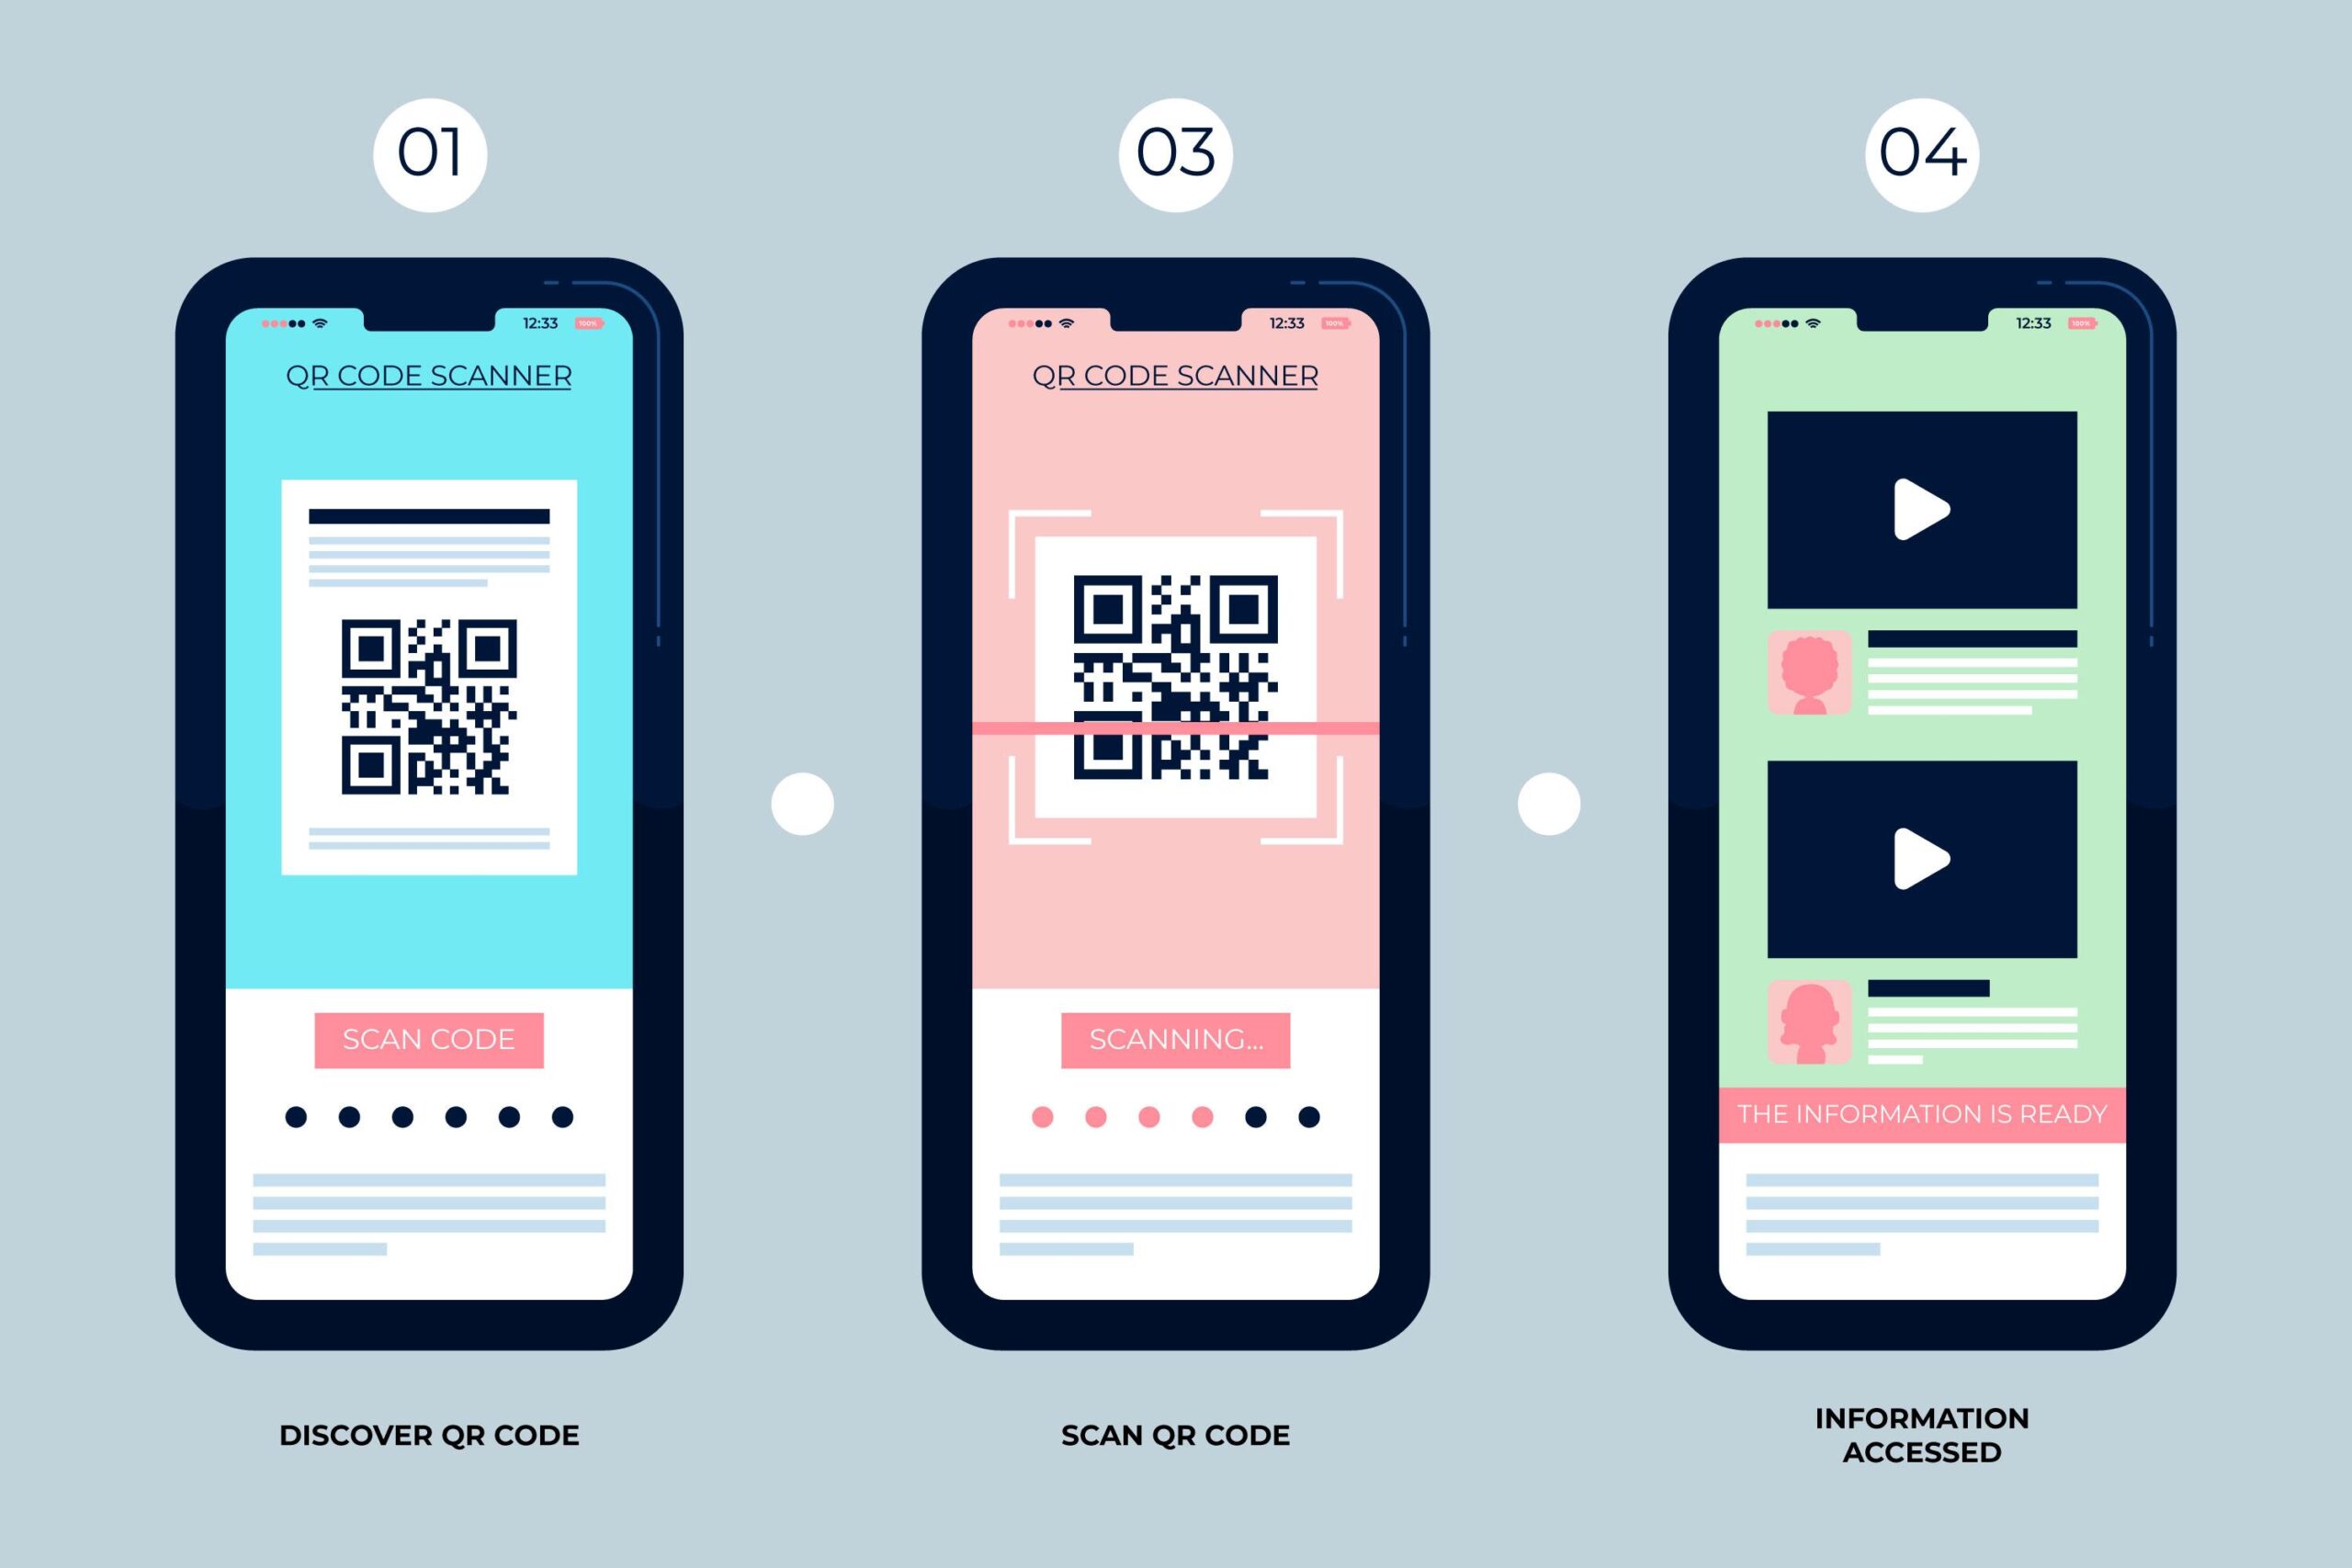 How to Scan a QR Code from a Screenshot in 3 Simple Steps